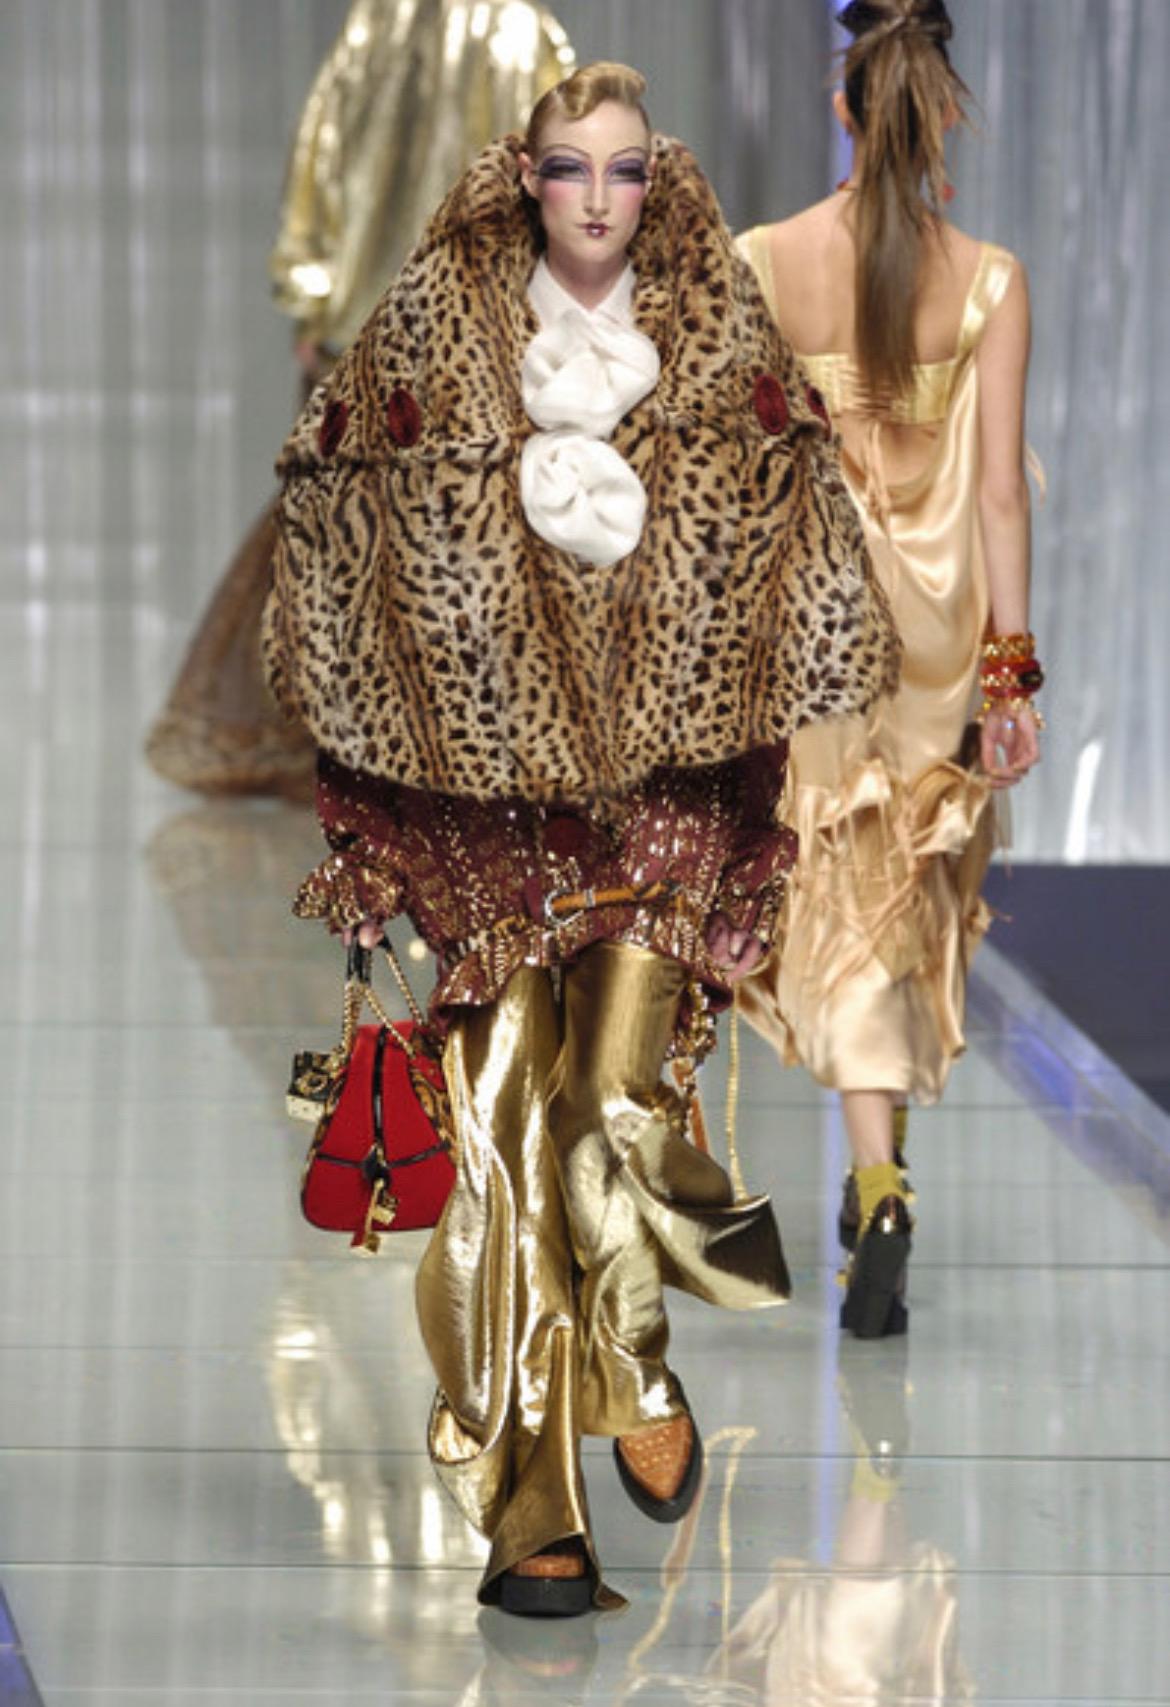 Presenting a stunning cheetah print rabbit fur Christian Dior Boutique oversized coat, designed by John Galliano. From the Fall/Winter 2004 'gambler' collection, the cheetah printed fur debuted on look number 33 on Jade Parfitt. This beautiful and